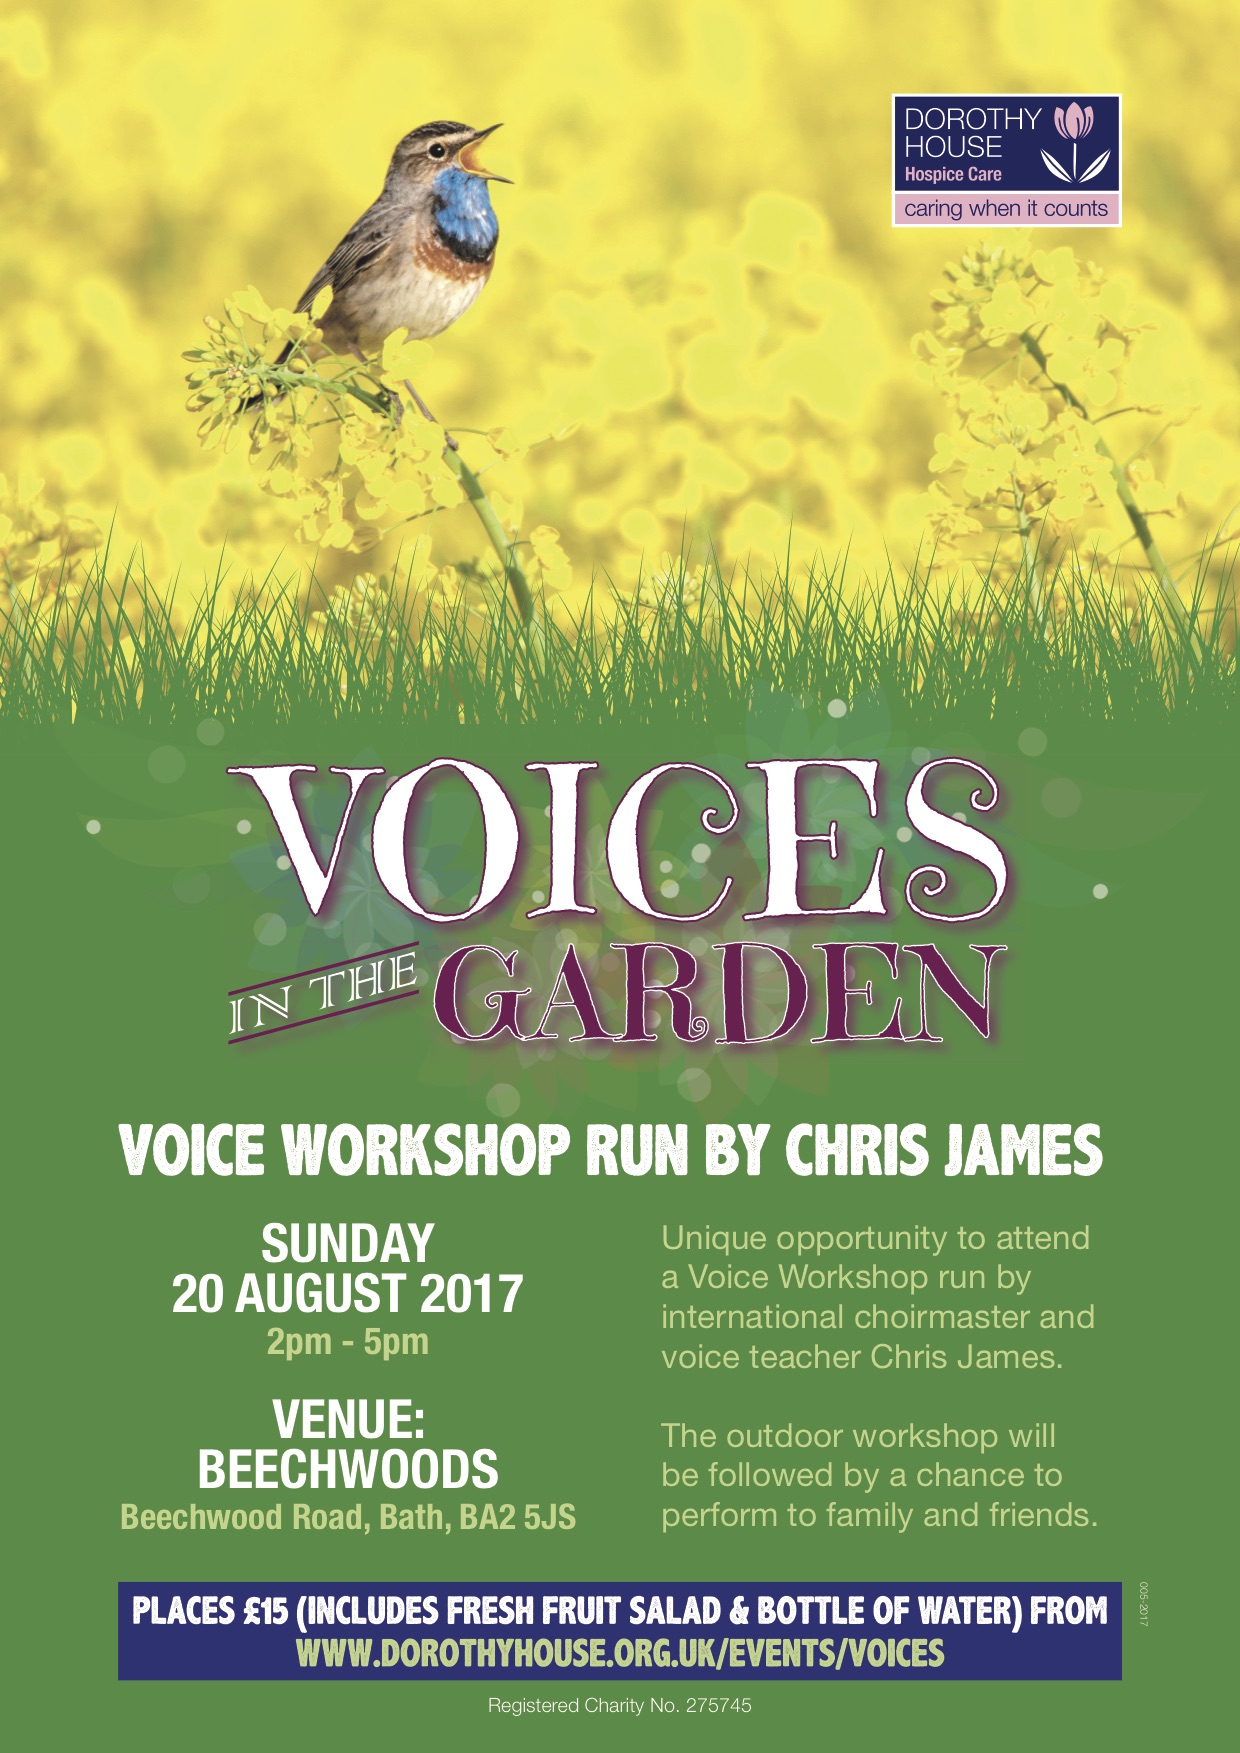 BATH - Voices in the Garden with Chris James